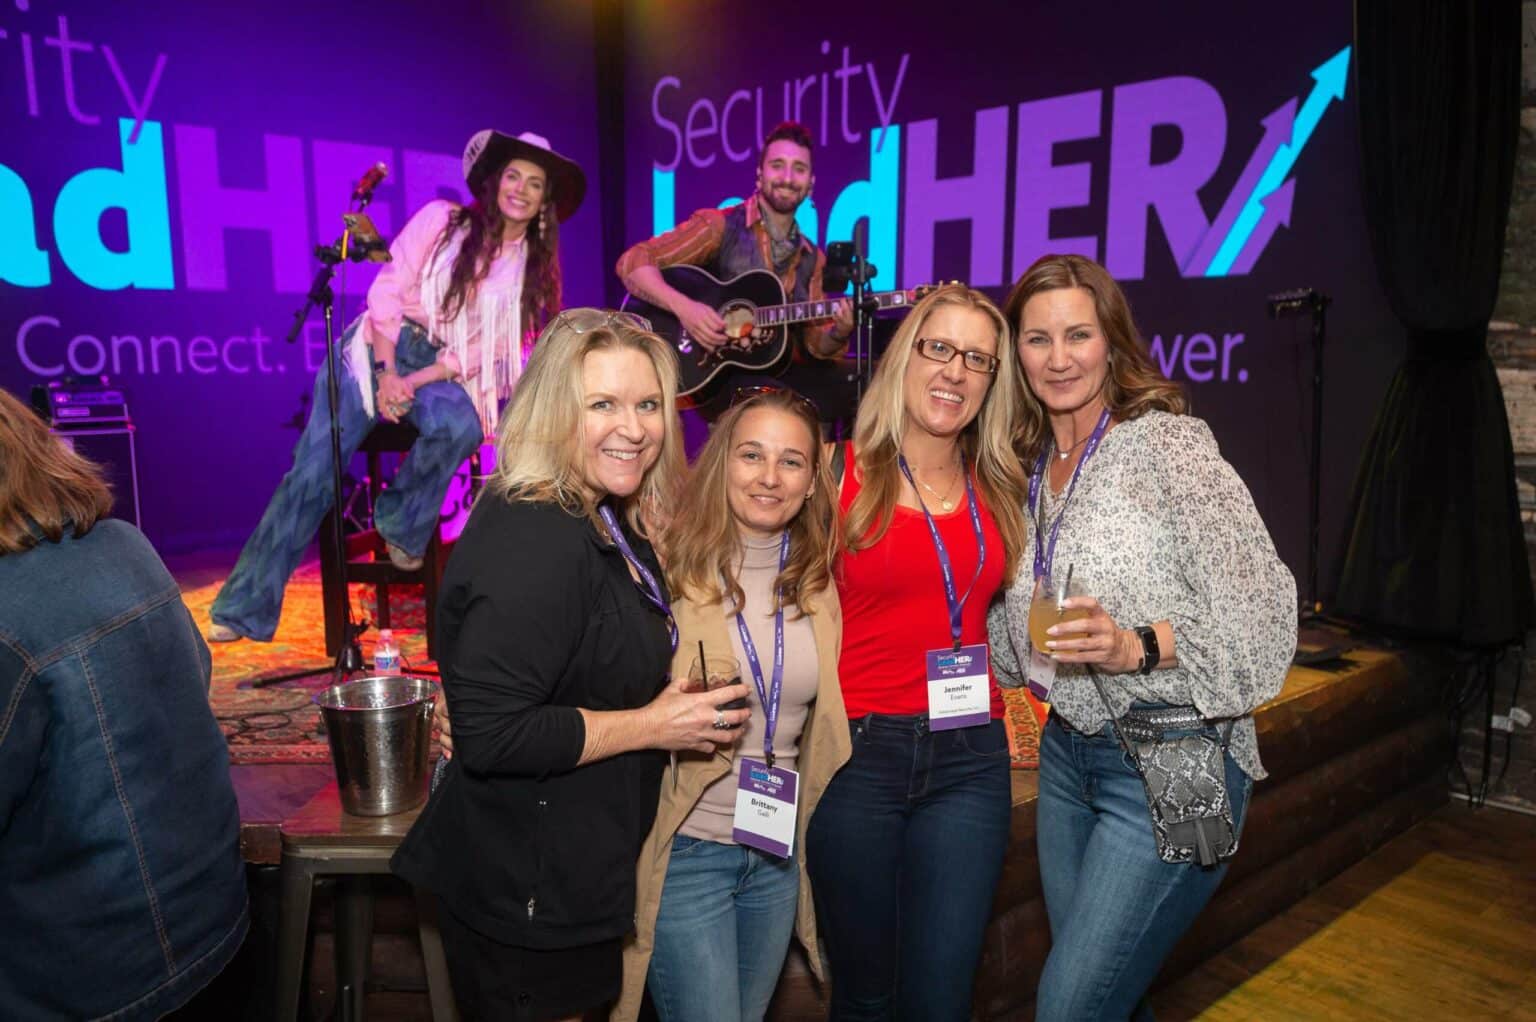 "I left the conference with so much excitement" - successful debut for Security LeadHER event